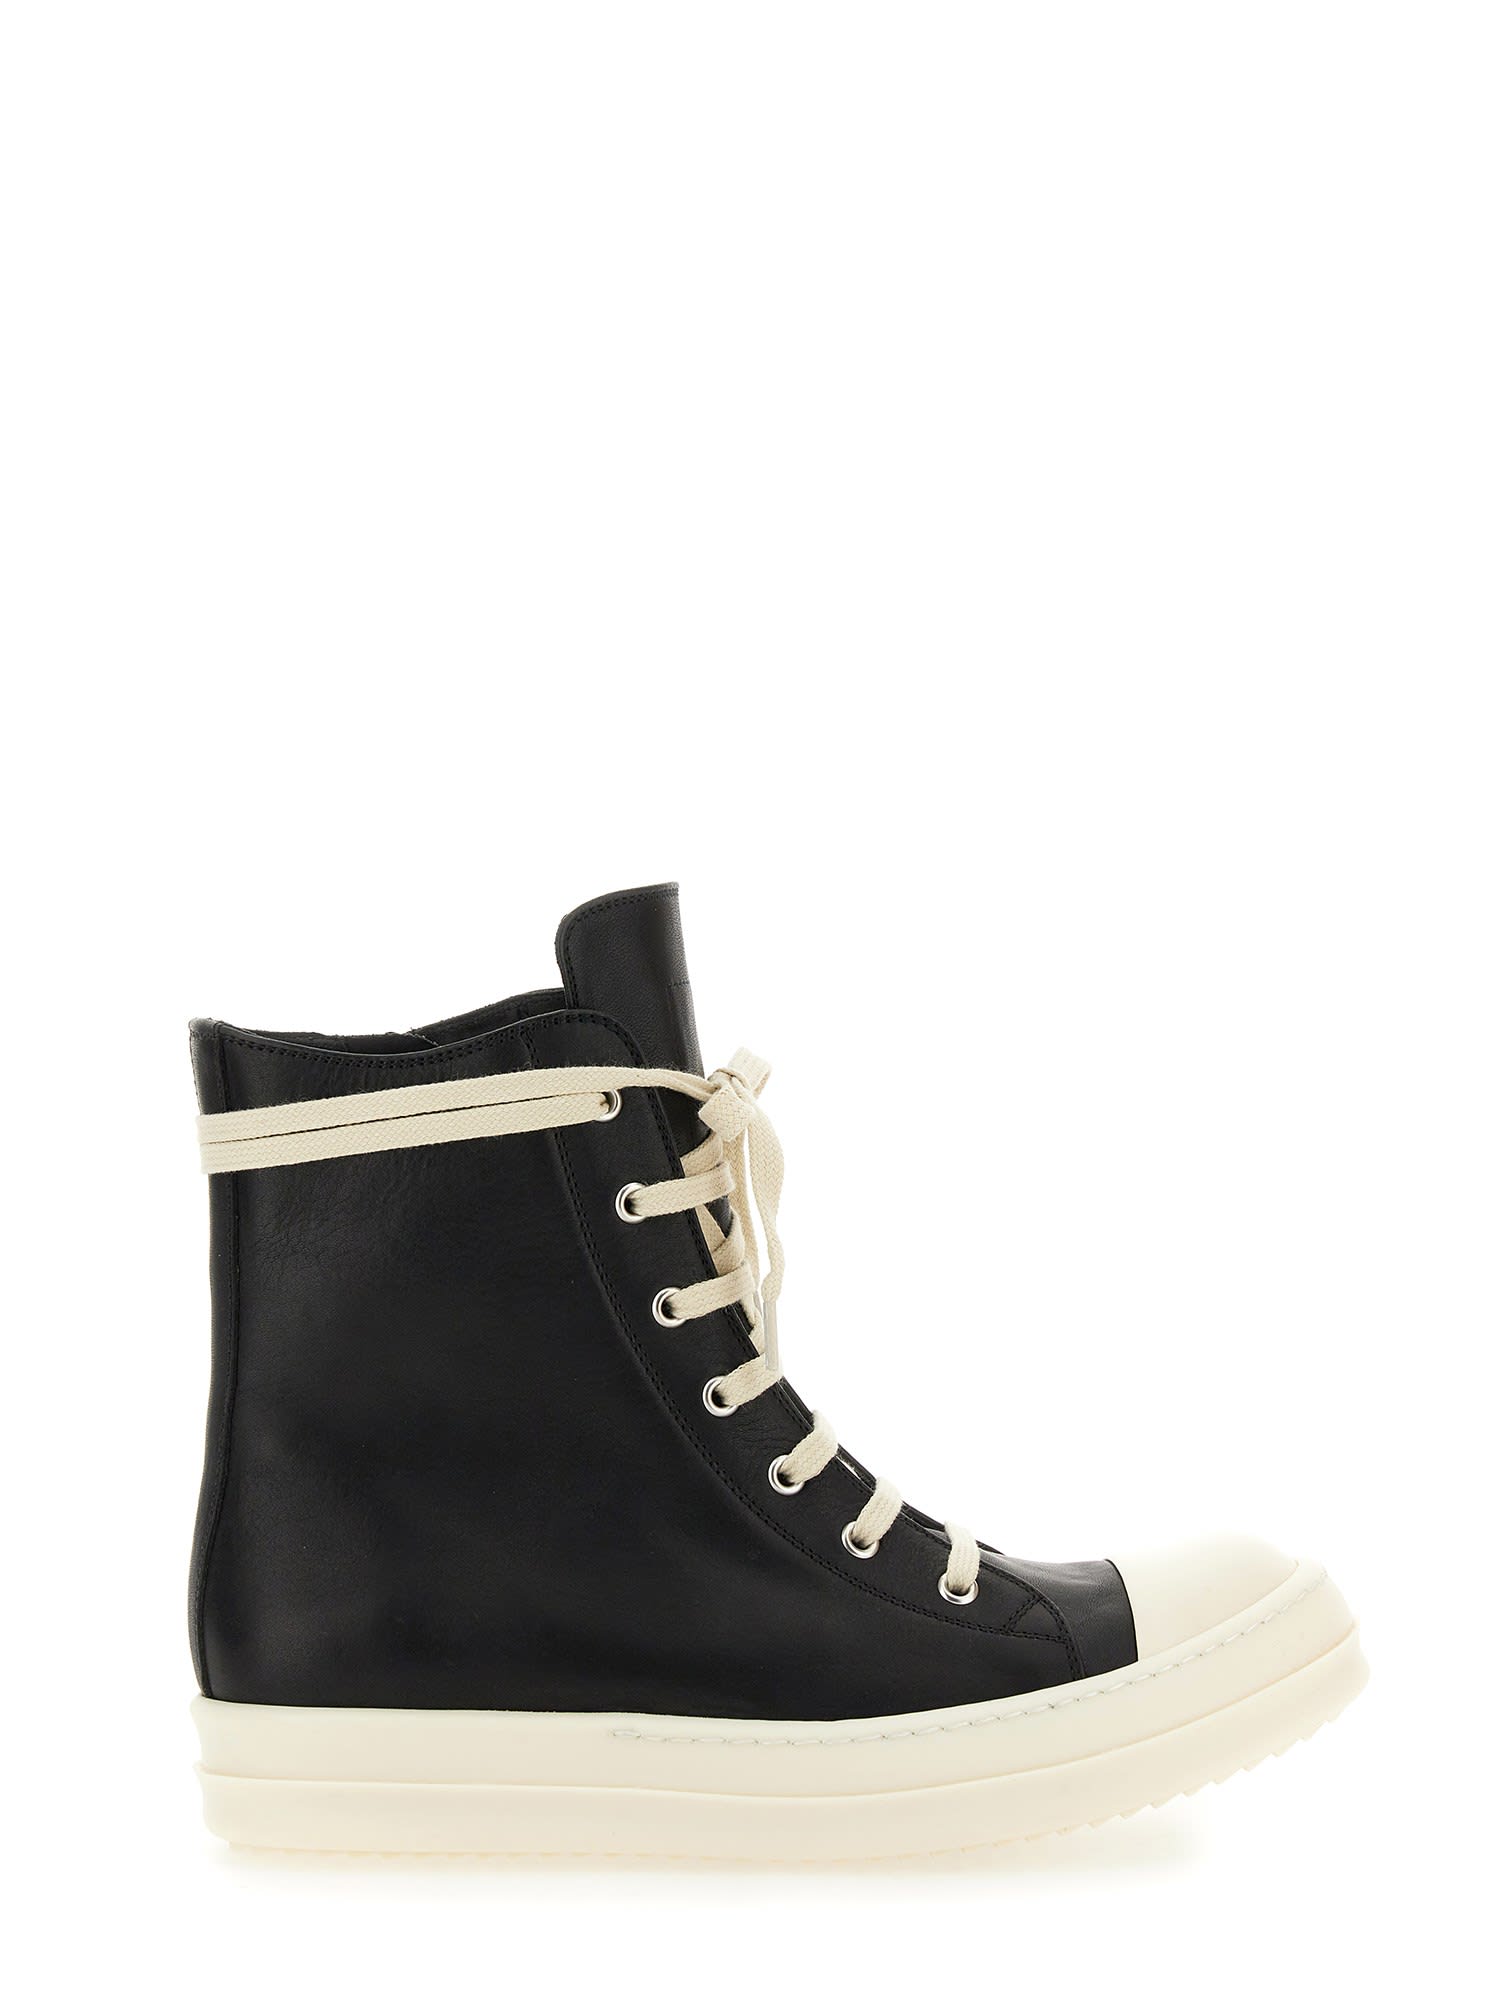 RICK OWENS LEATHER SNEAKER